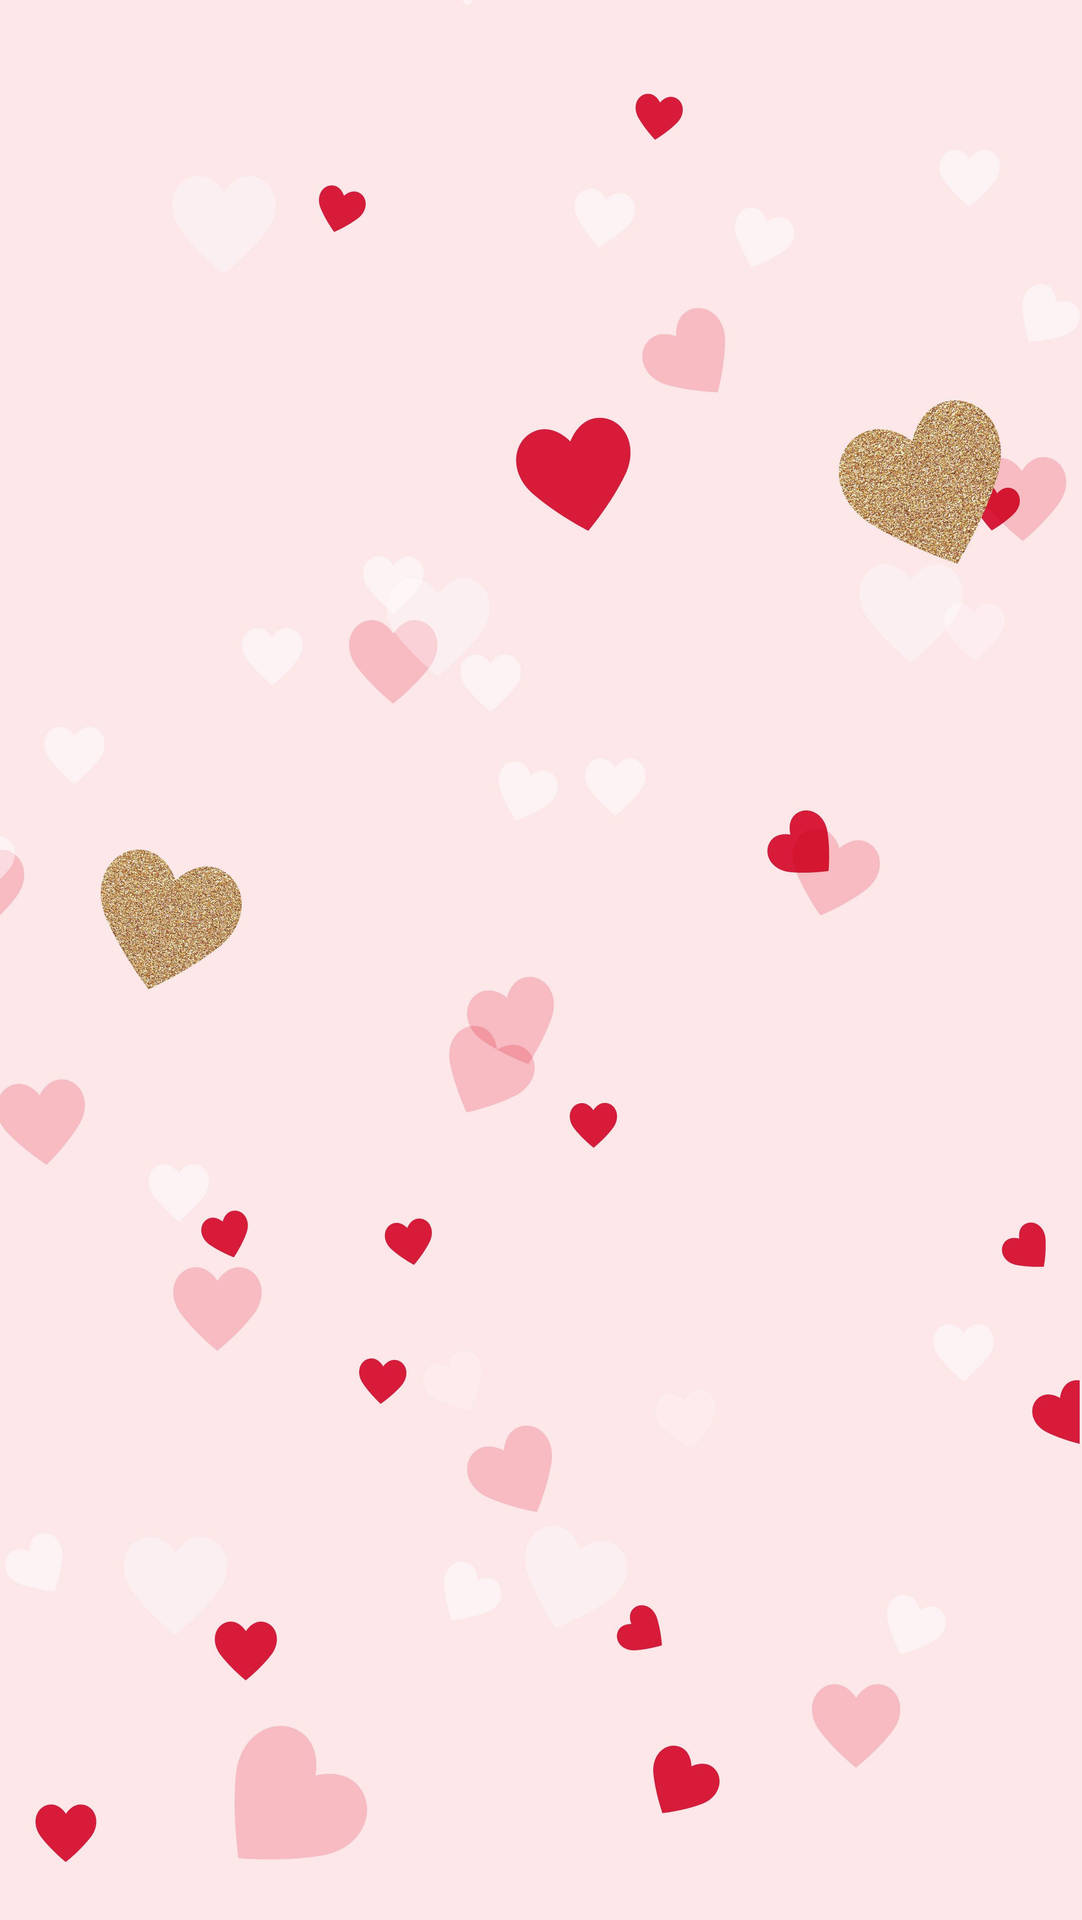 Love is in the air! Wallpaper